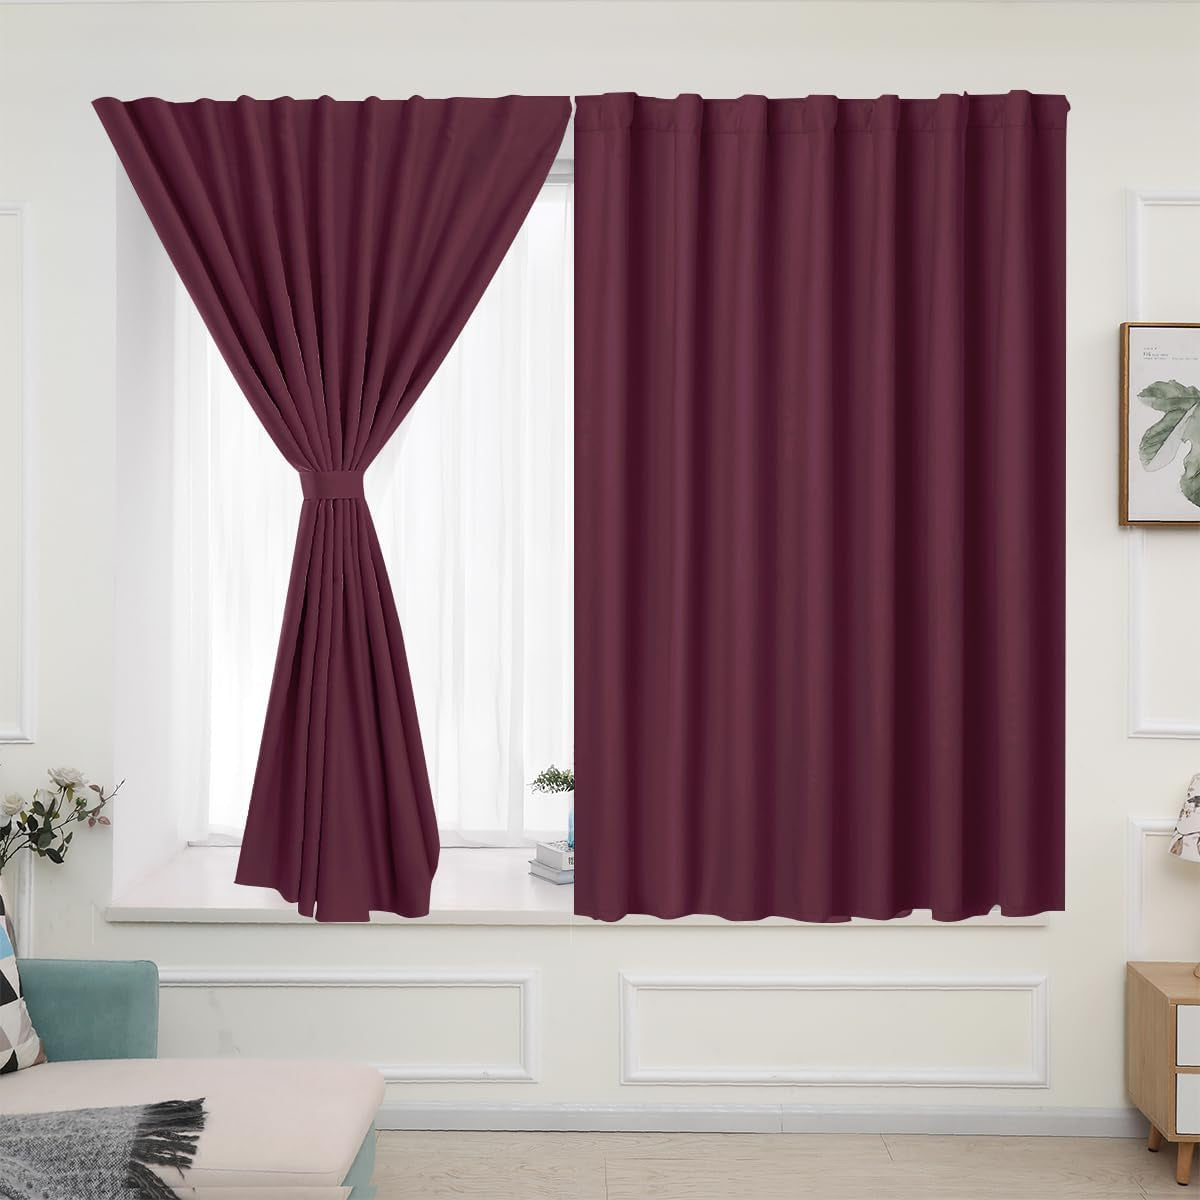 Muamar 2Pcs Blackout Curtains Privacy Curtains 63 Inch Length Window Curtains,Easy Install Thermal Insulated Window Shades,Stick Curtains No Rods, Black 42" W X 63" L  Muamar Wine 29"W X 36"L 